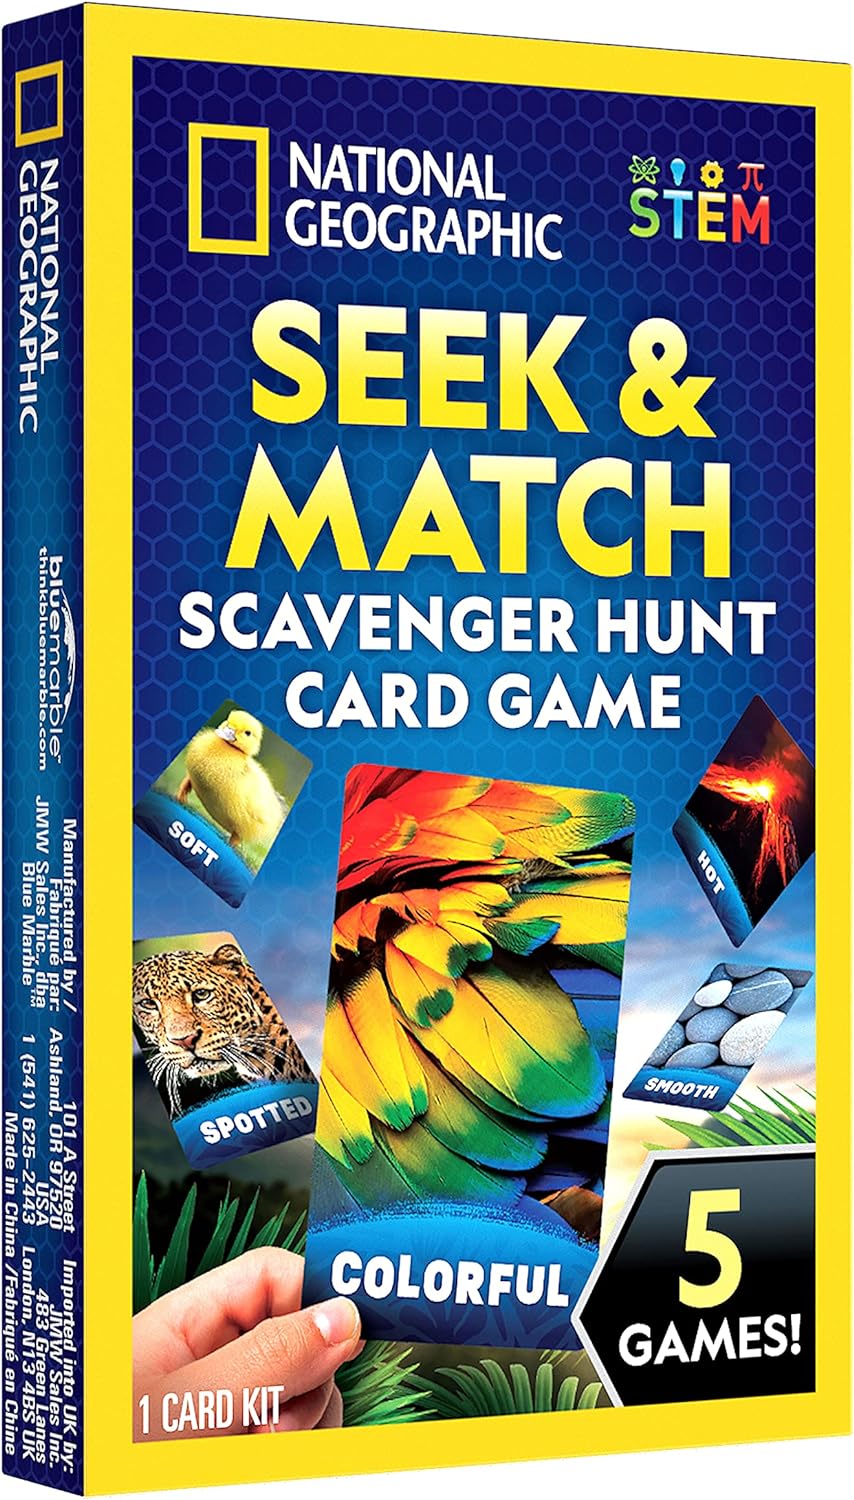 NATIONAL GEOGRAPHIC Scavenger Hunt for Kids Card Game - Seek & Match Objects from 40 Jumbo-Sized Cards, Camping Games, Activities for Toddlers, Car Game, Kids Outdoor Activities, Stocking Stuffers